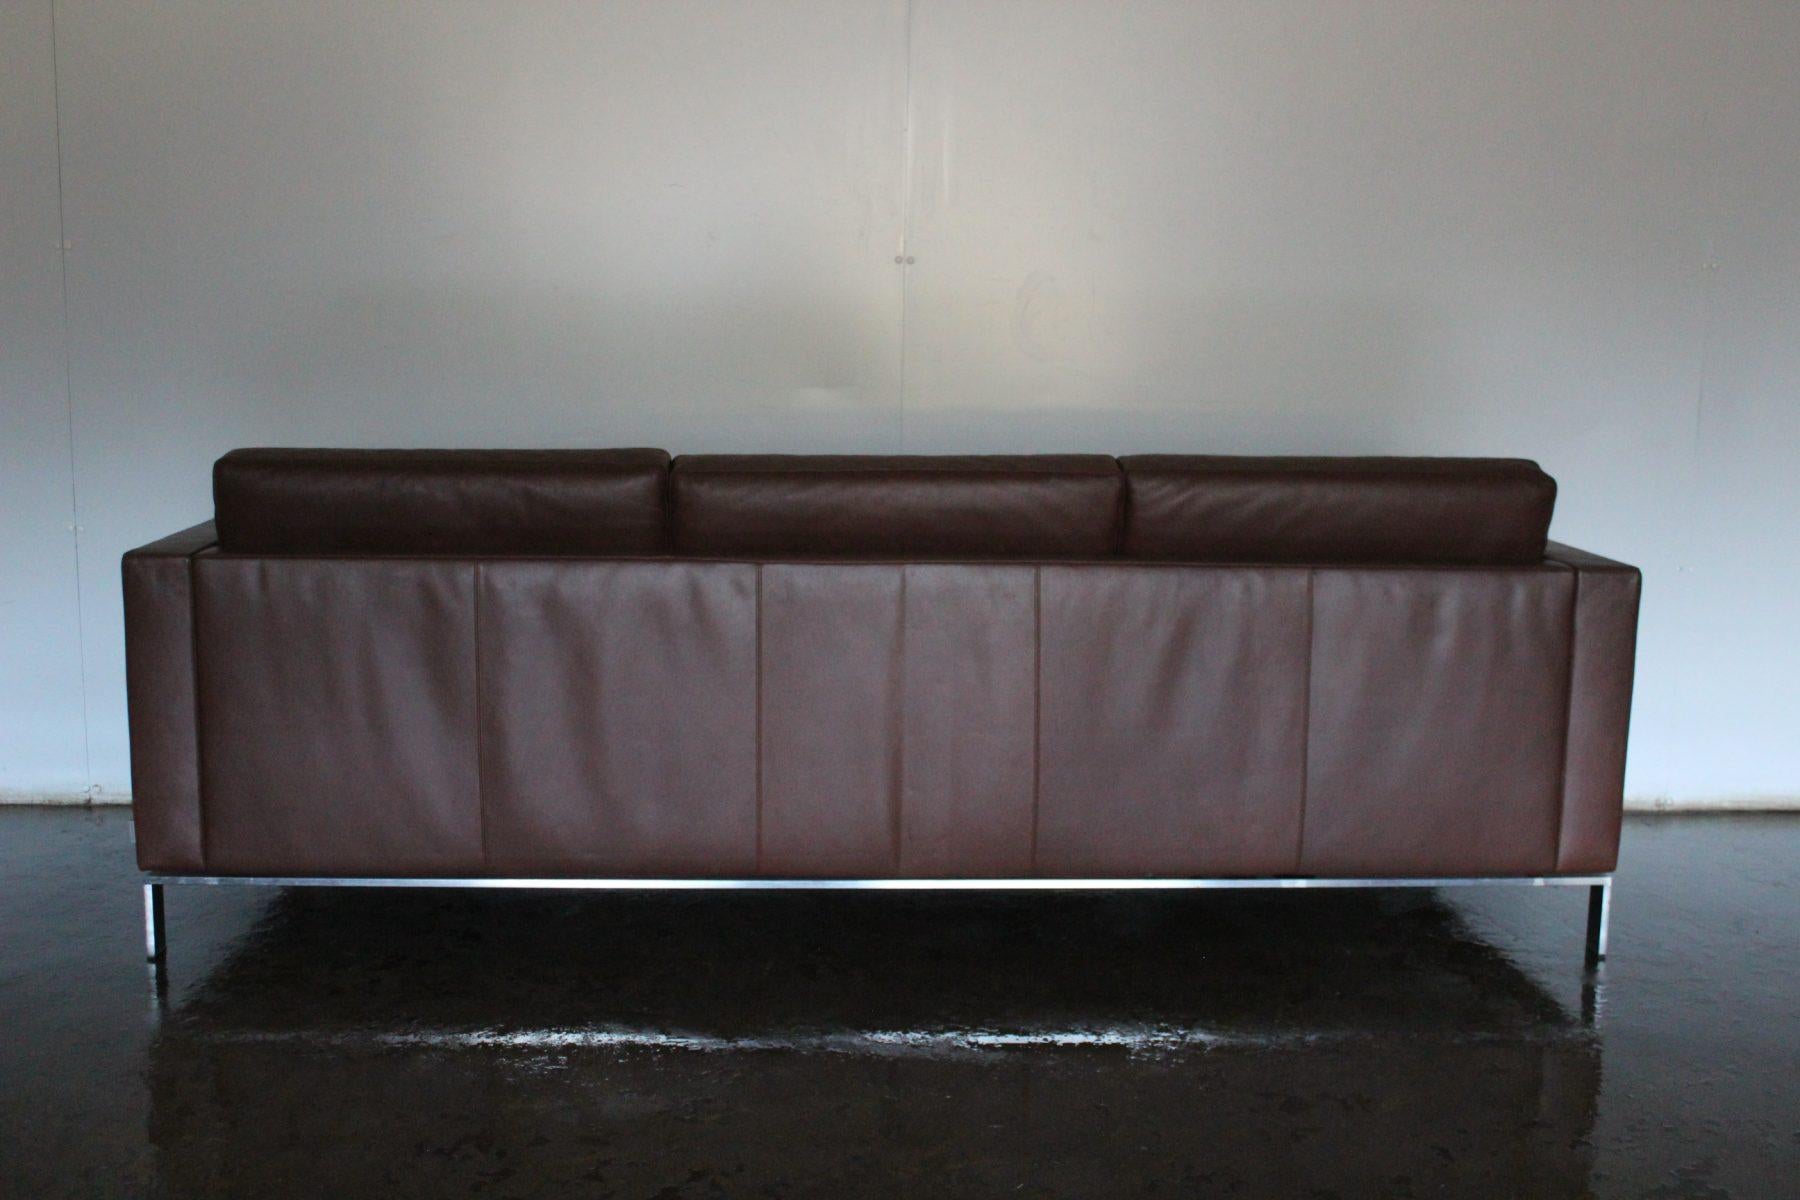 Walter Knoll “Foster 502.30” 3-Seat Sofa – In Dark Brown Leather For Sale 5